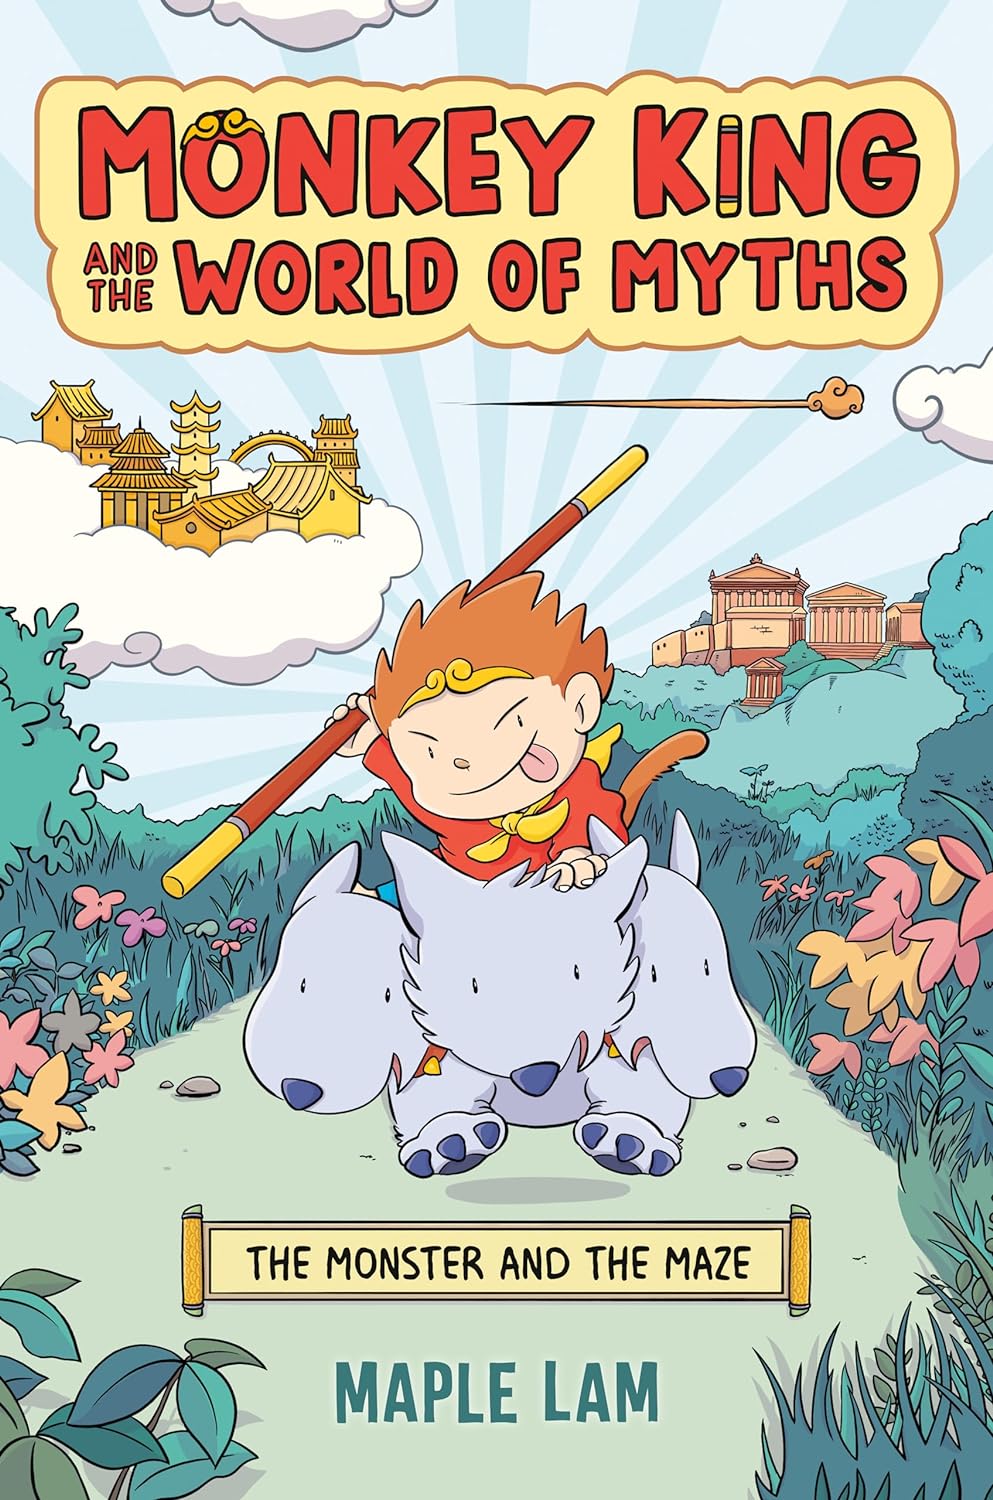 Monkey King and the World of Myths | This Week’s Comics